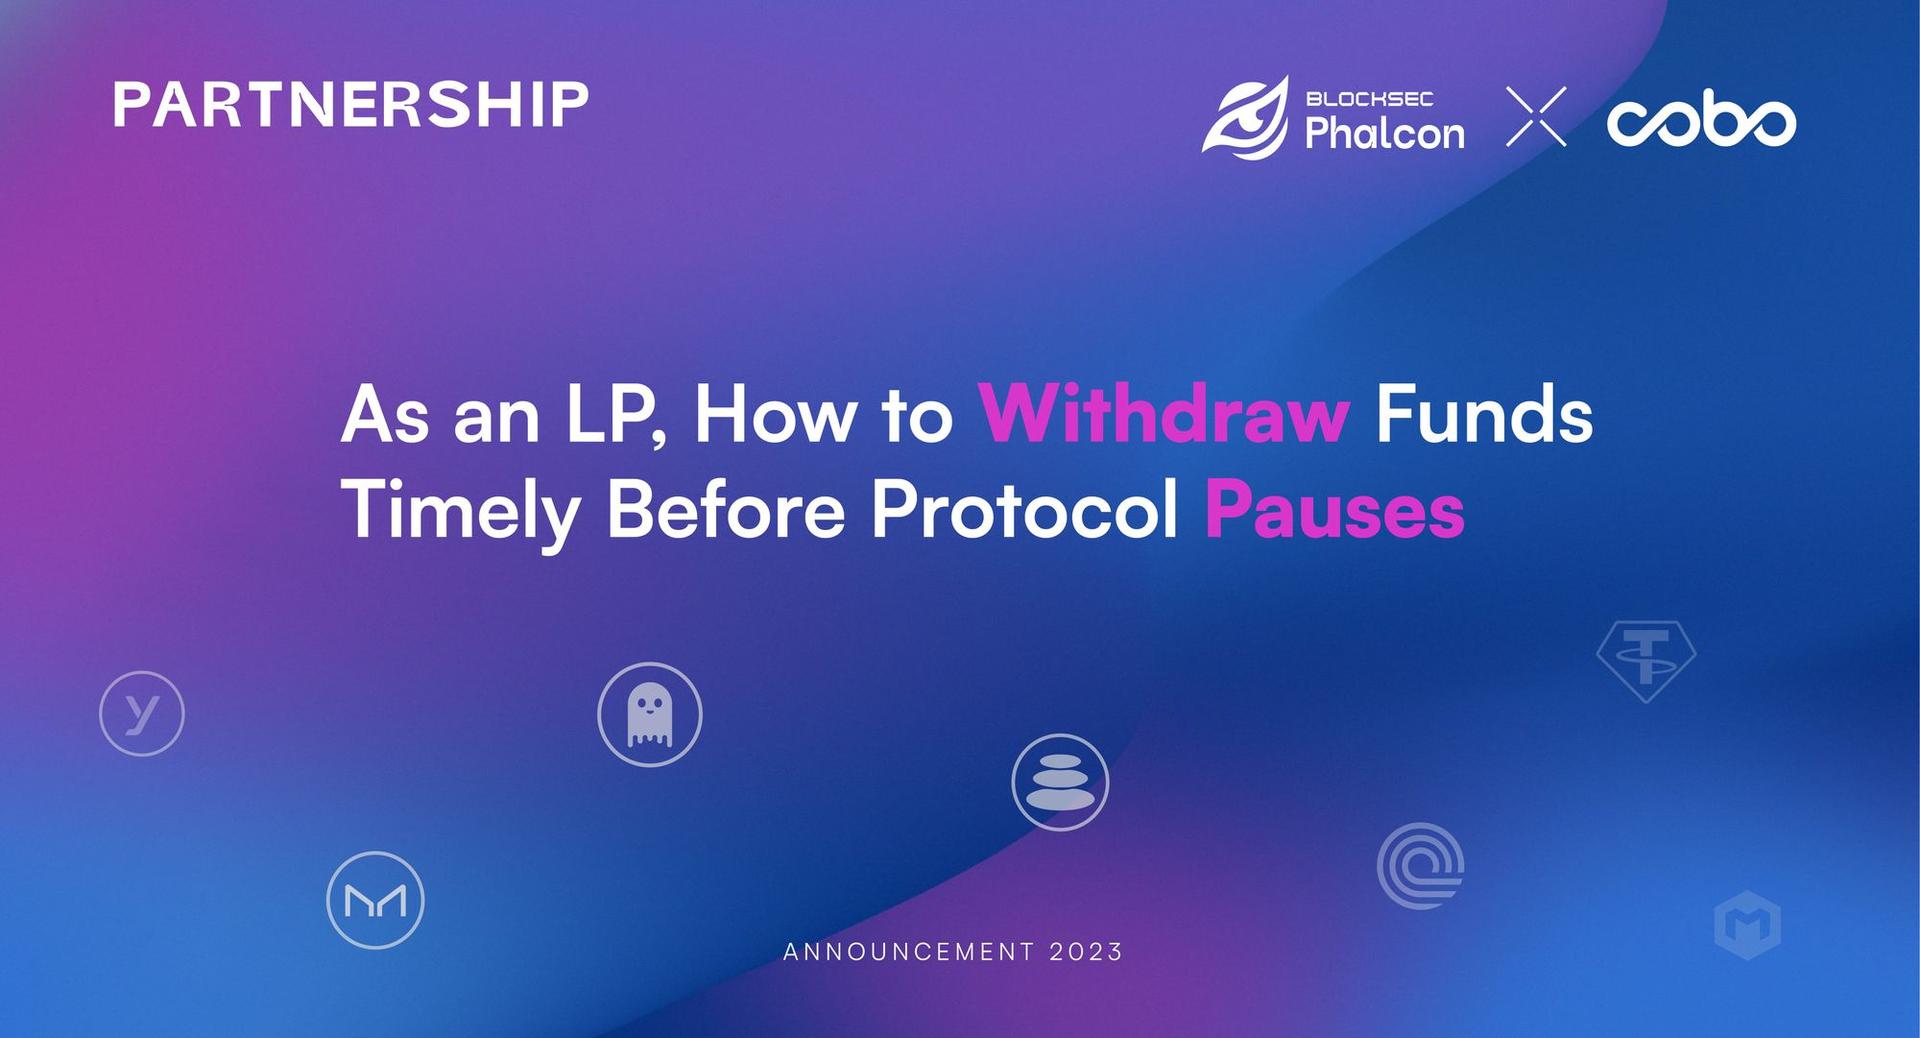 As an LP, How to Withdraw Funds Timely Before Protocol Pauses